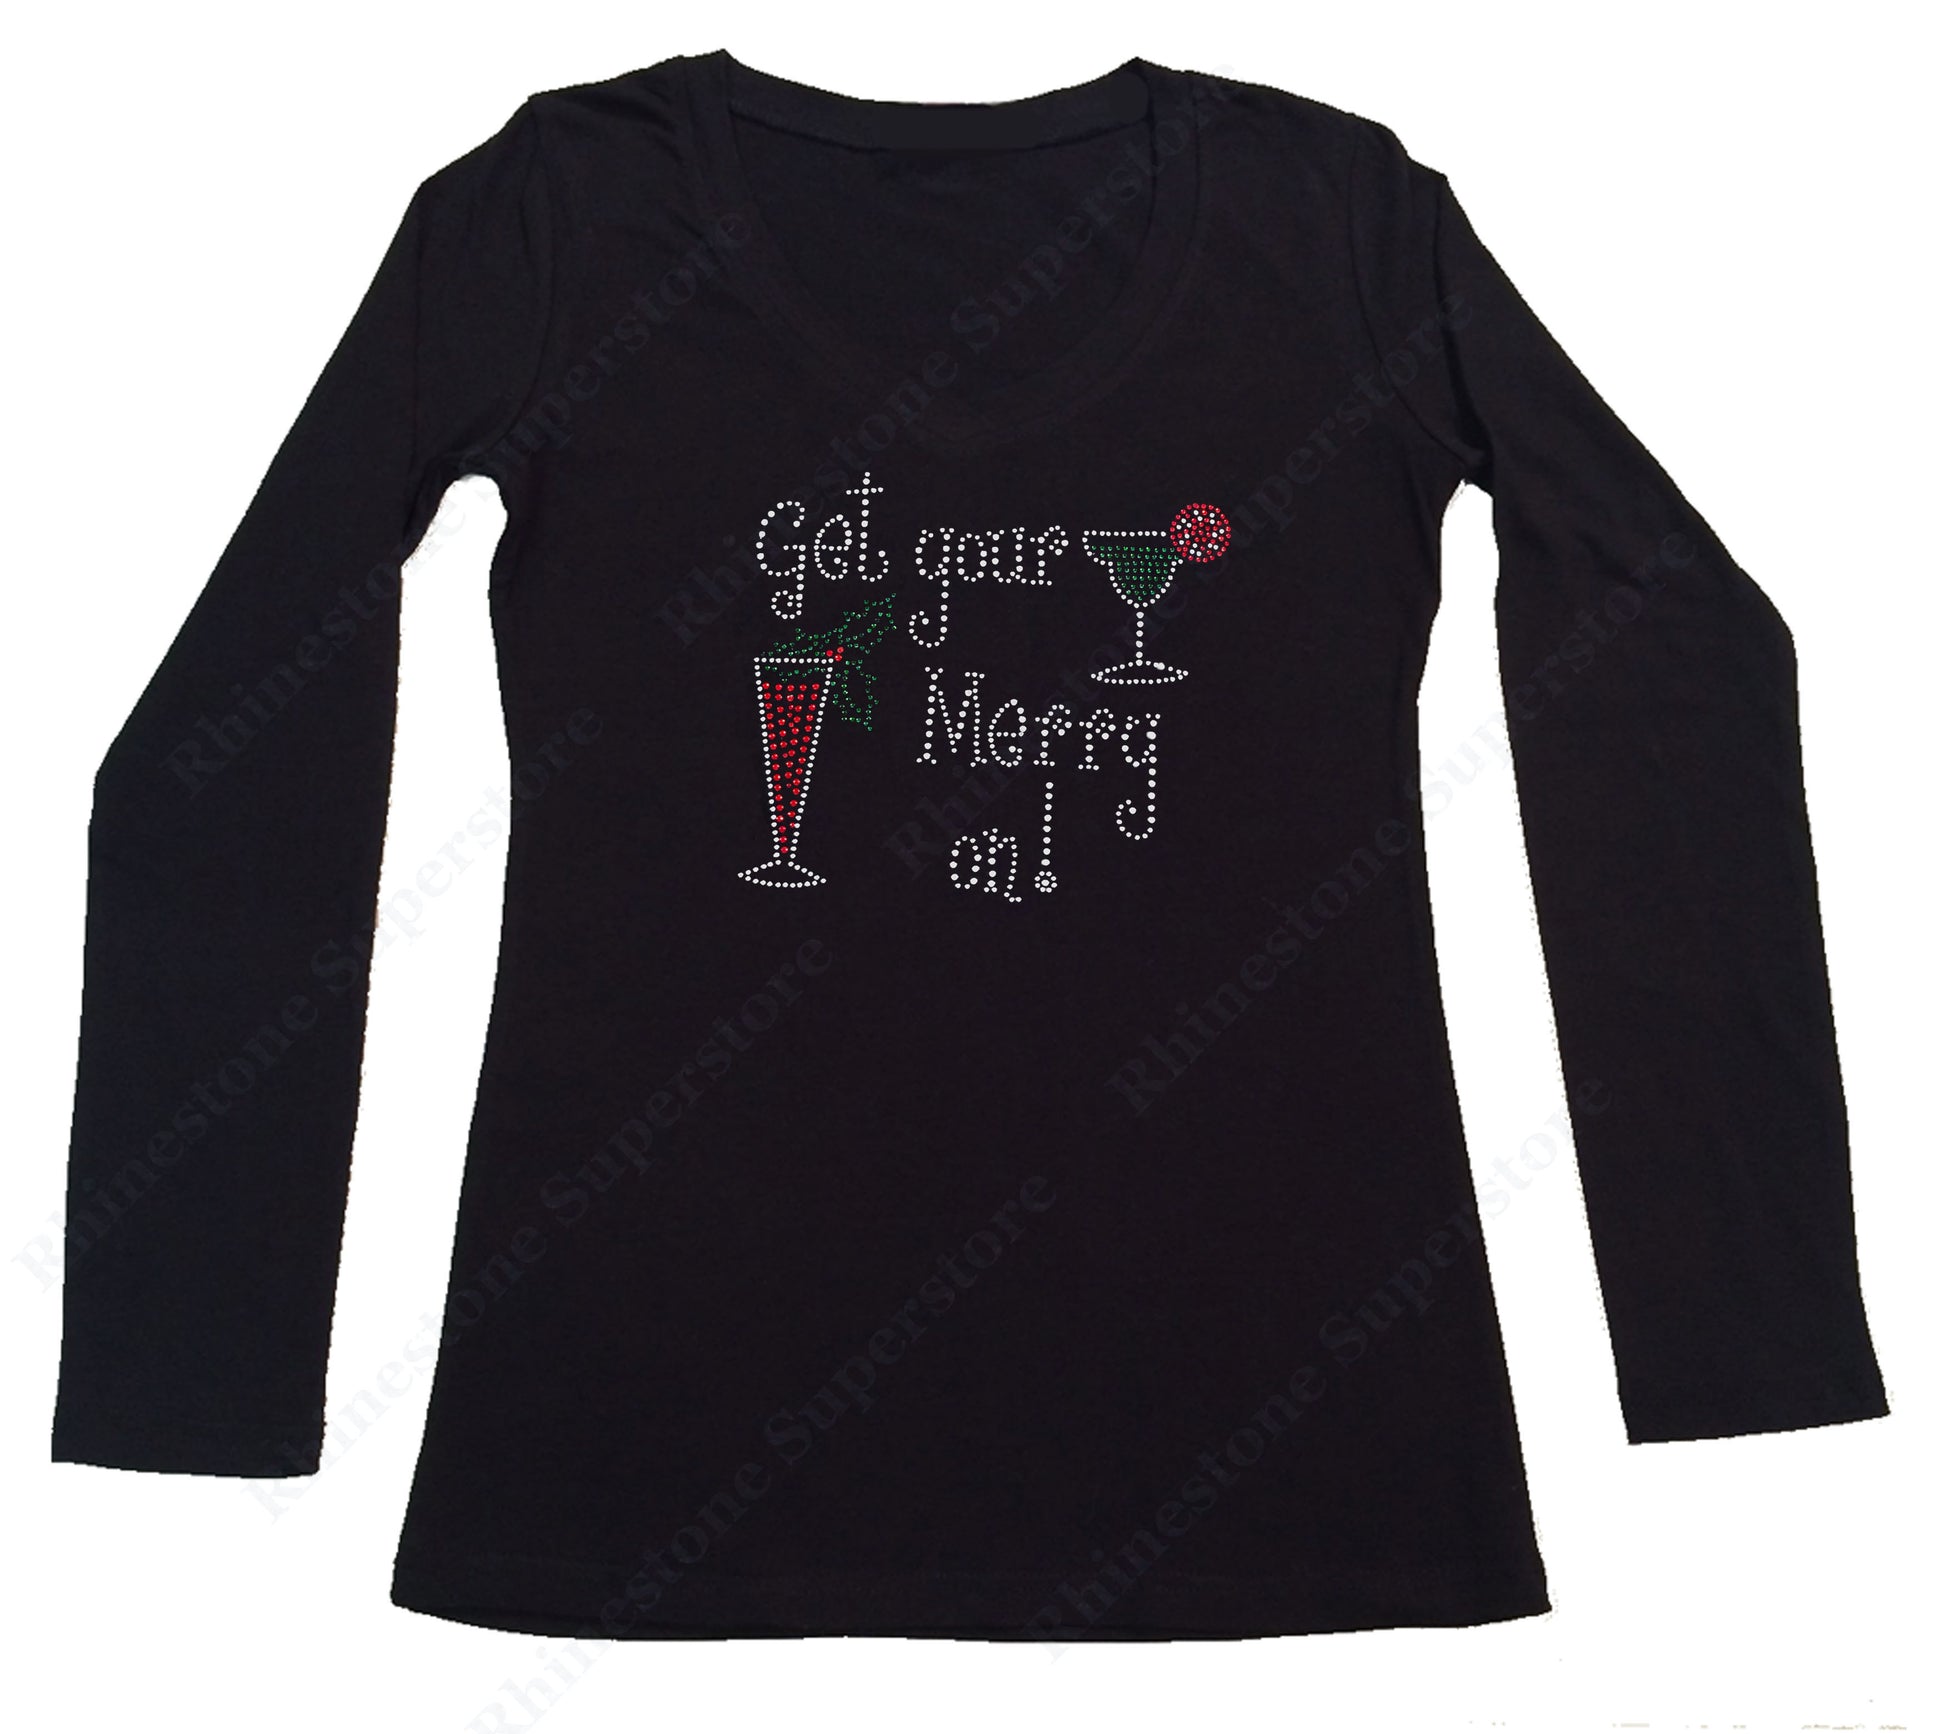 Get Your Merry On!  Christmas Design long sleeve